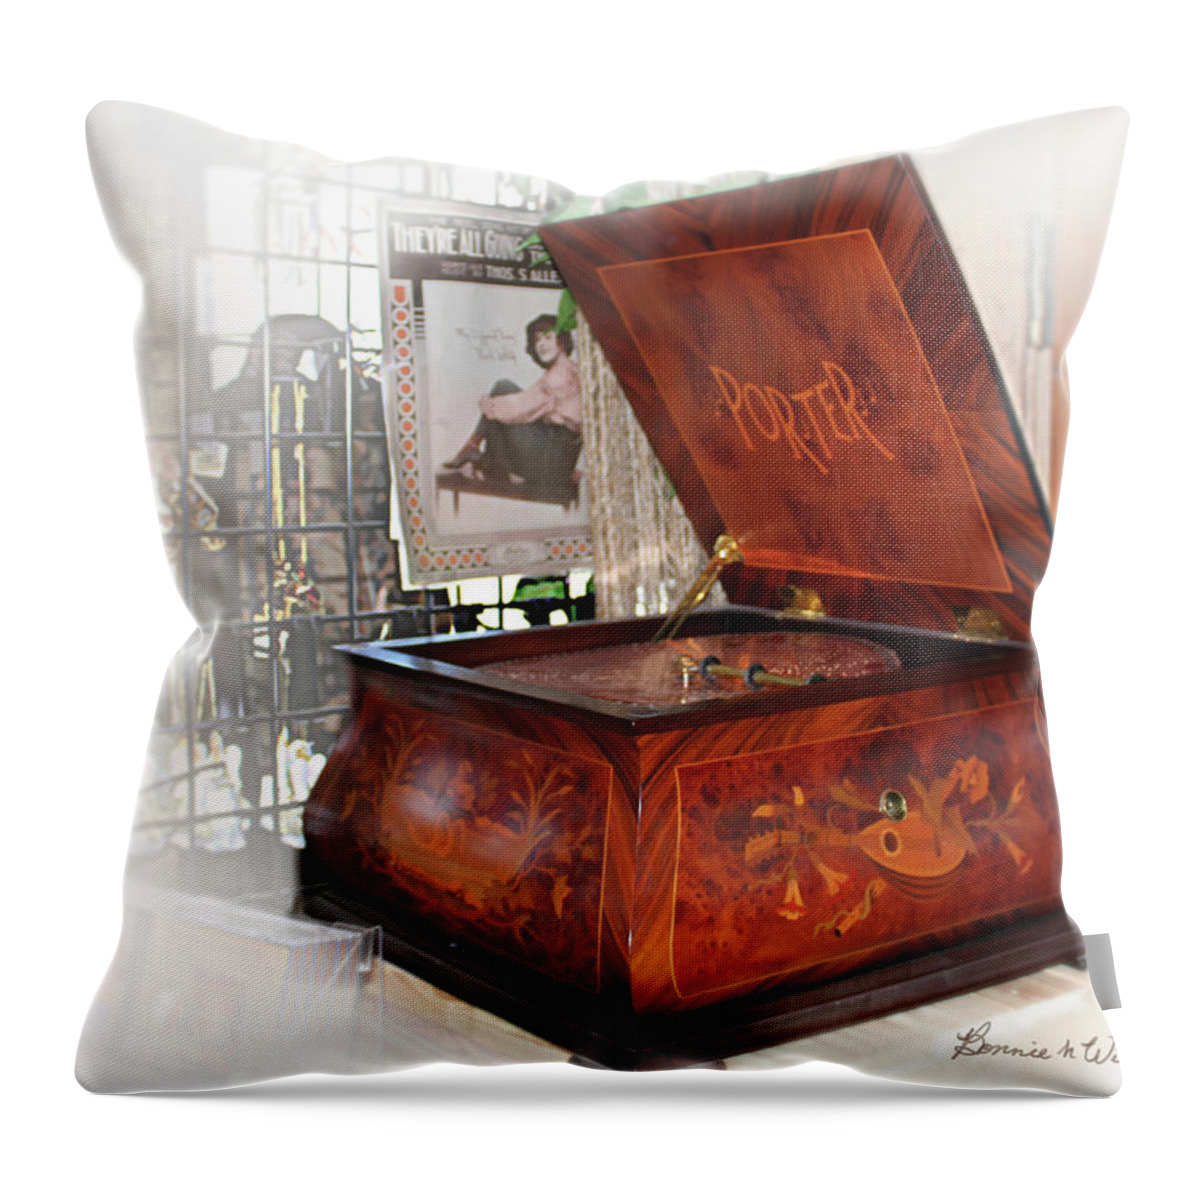 Phonograph Throw Pillow featuring the digital art Antique Phonograph by Bonnie Willis